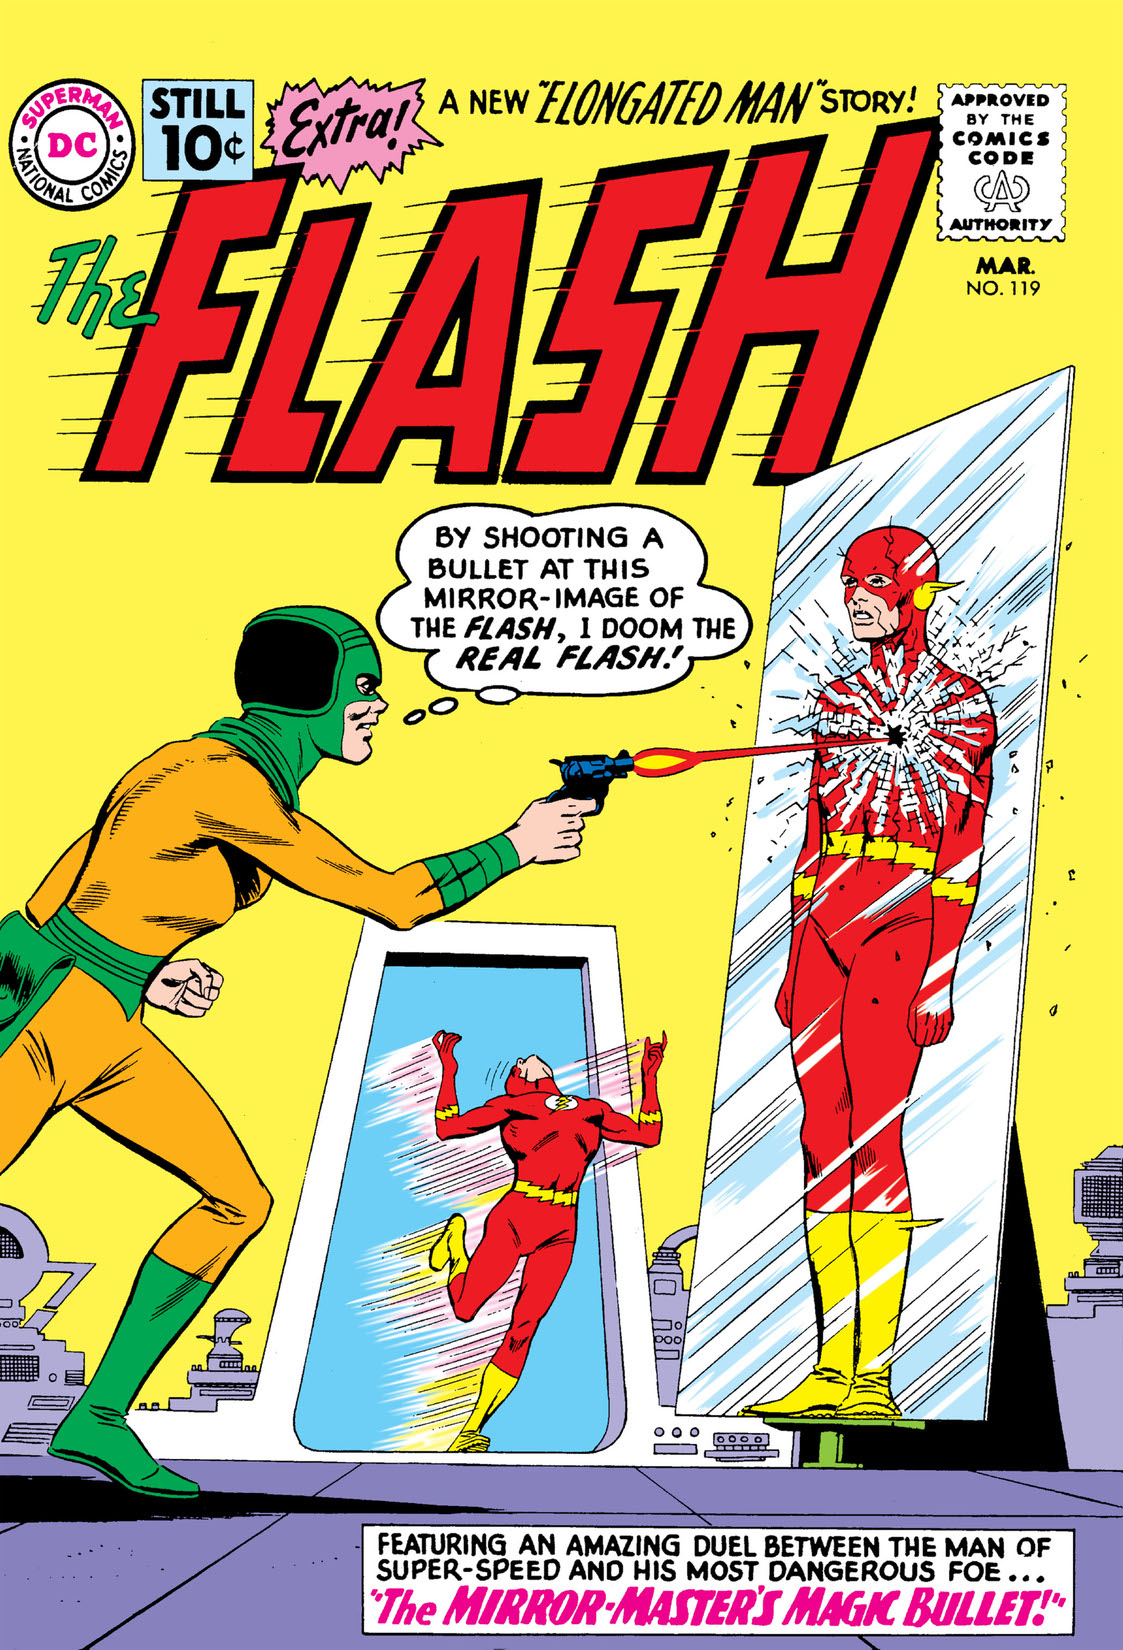 The Flash (1959-) #119 preview images